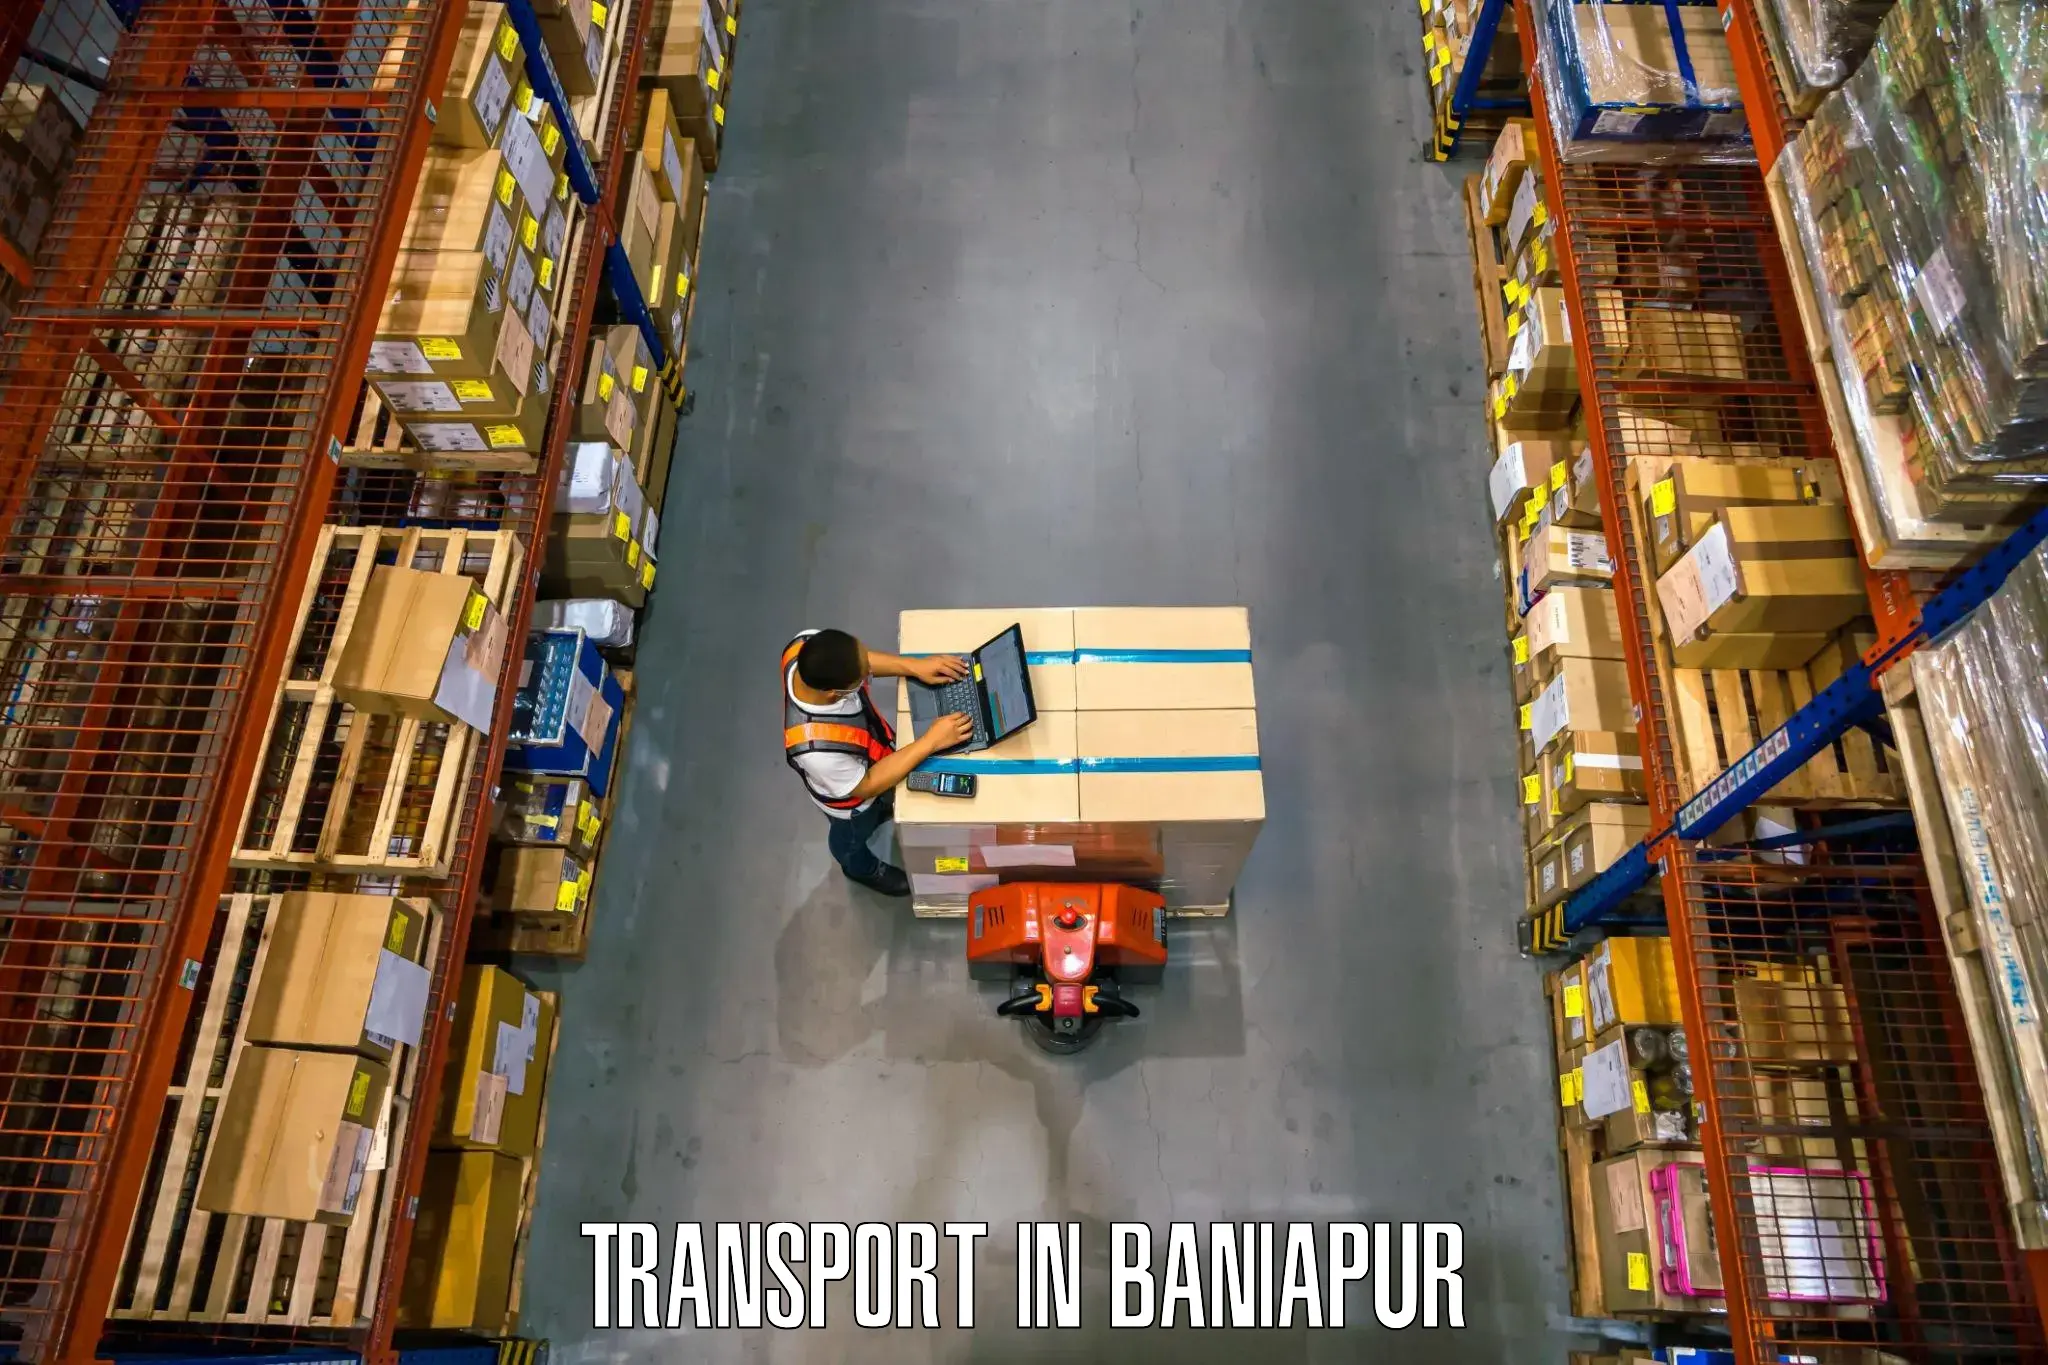 Transportation services in Baniapur